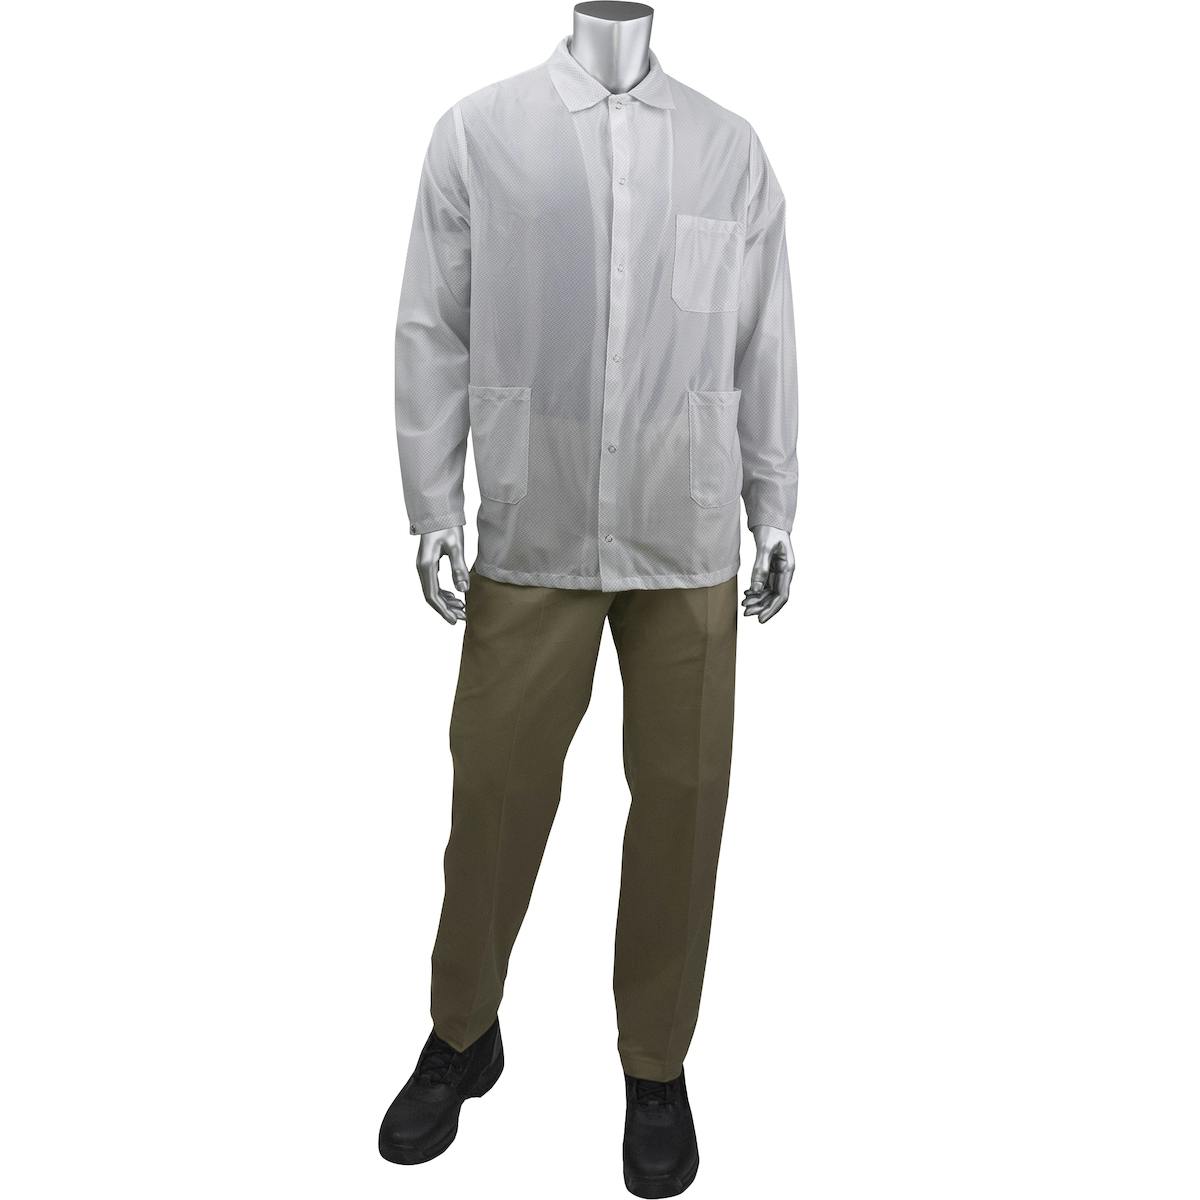 StatMaster Short ESD Labcoat, White (BR49A-47WH)